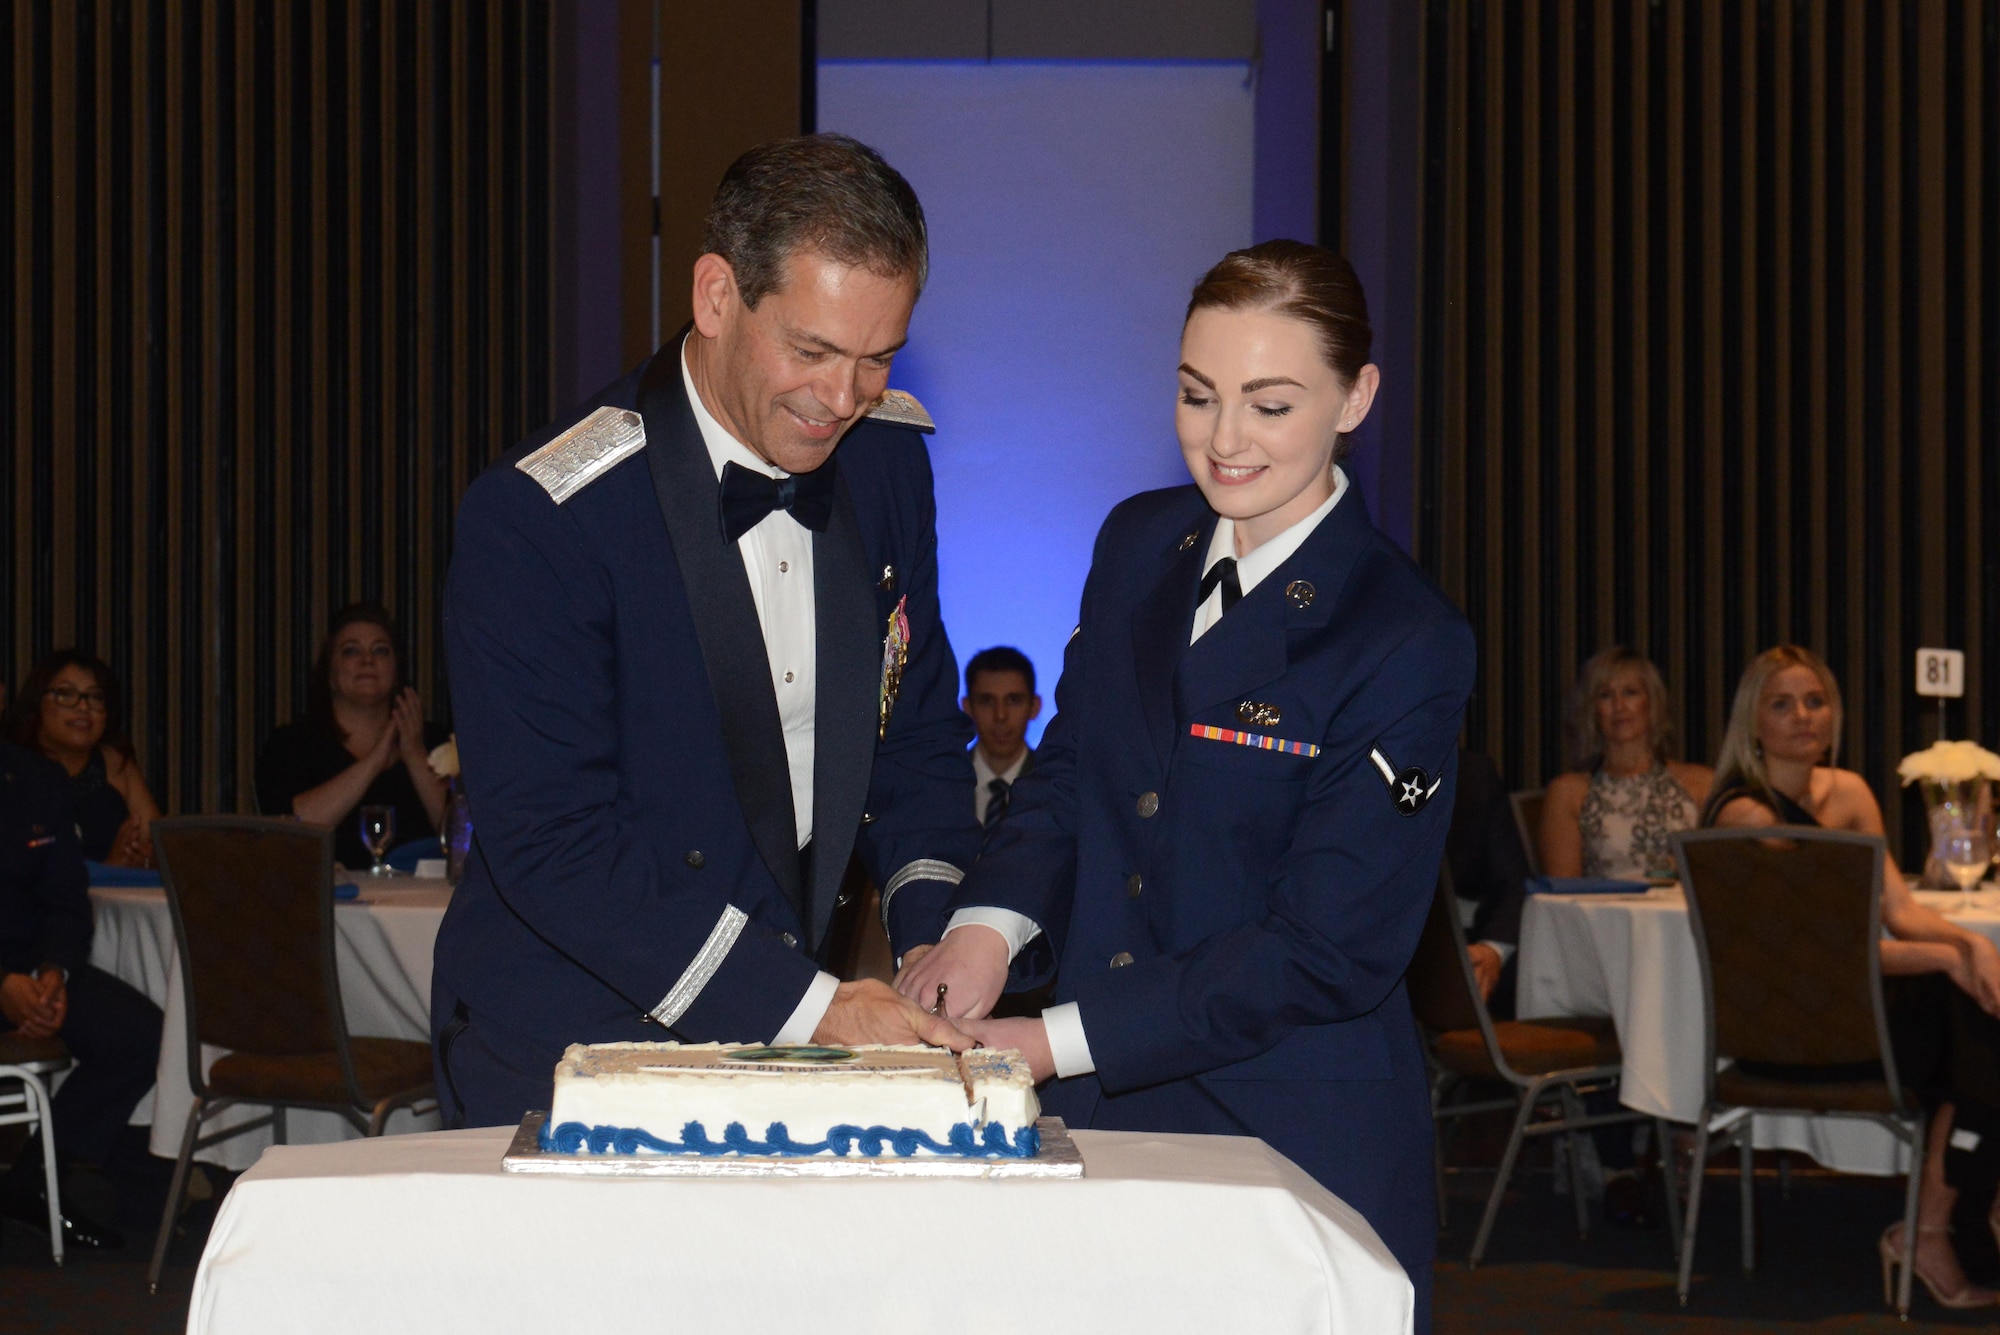 Air Force Lt. Gen. Kenneth Wilsbach, commander of the North American Aerospace Defense Command, Alaskan NORAD Region, U.S. Northern Command, Alaskan Command, and 11th Air Force, and Airman Savanna Soukey, 3rd Maintenance Squadron Raptor Aerospace Ground Equipment specialist, cut a cake during the 2016 Joint Base Elmendorf-Richardson Air Force Ball at the Anchorage Egan Center, Alaska, Sept. 24, 2016. This event marked the Air Force’s 69th birthday celebrating the Air Force’s heritage through reflection, ceremony and camaraderie.